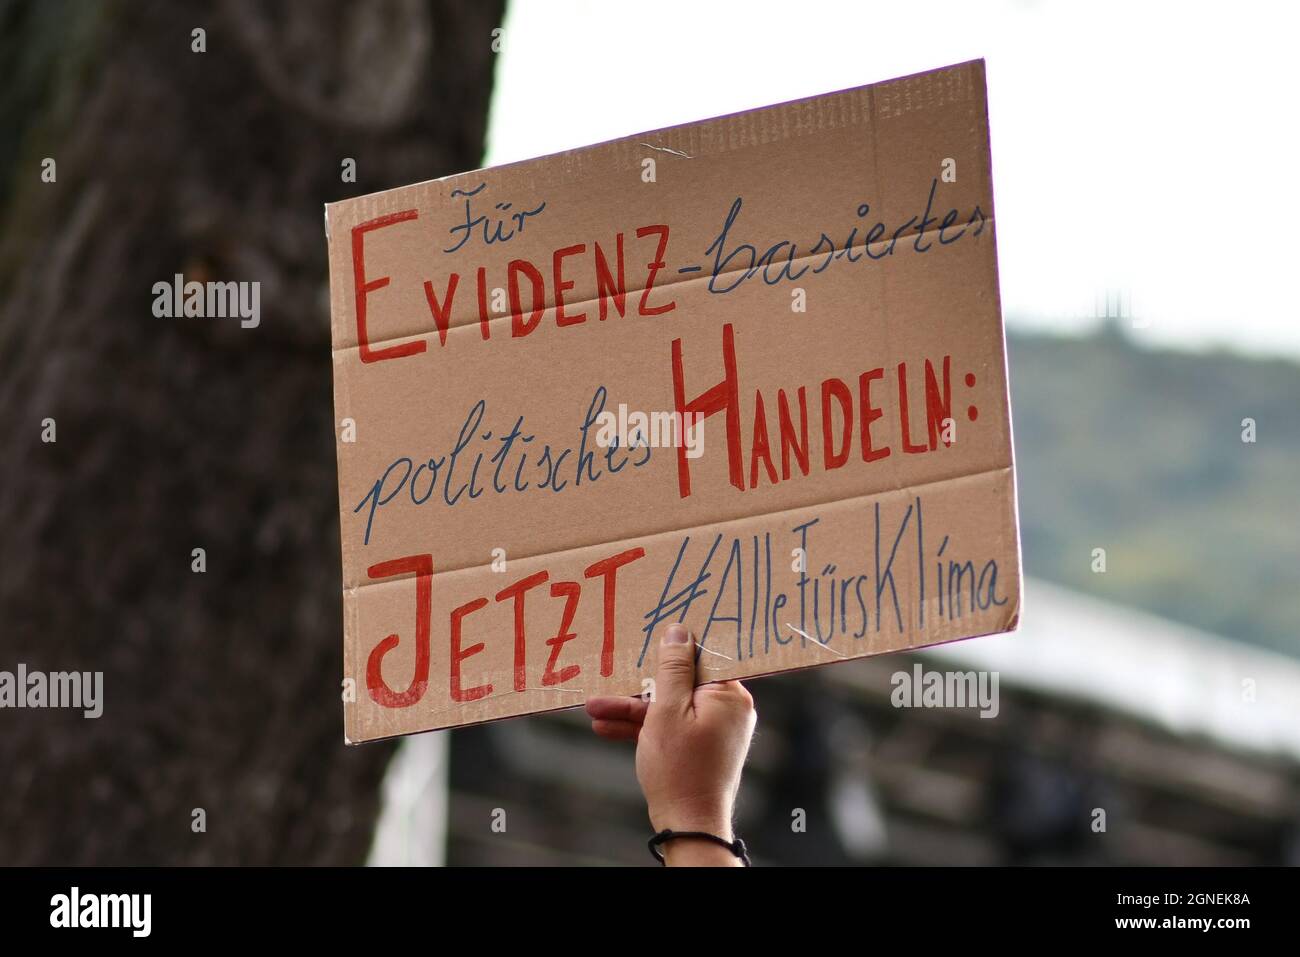 Heidelberg, Germany - 24th September 2021: Sign saying 'for evidence based political acting' in German at Global Climate Strike demonstration Stock Photo